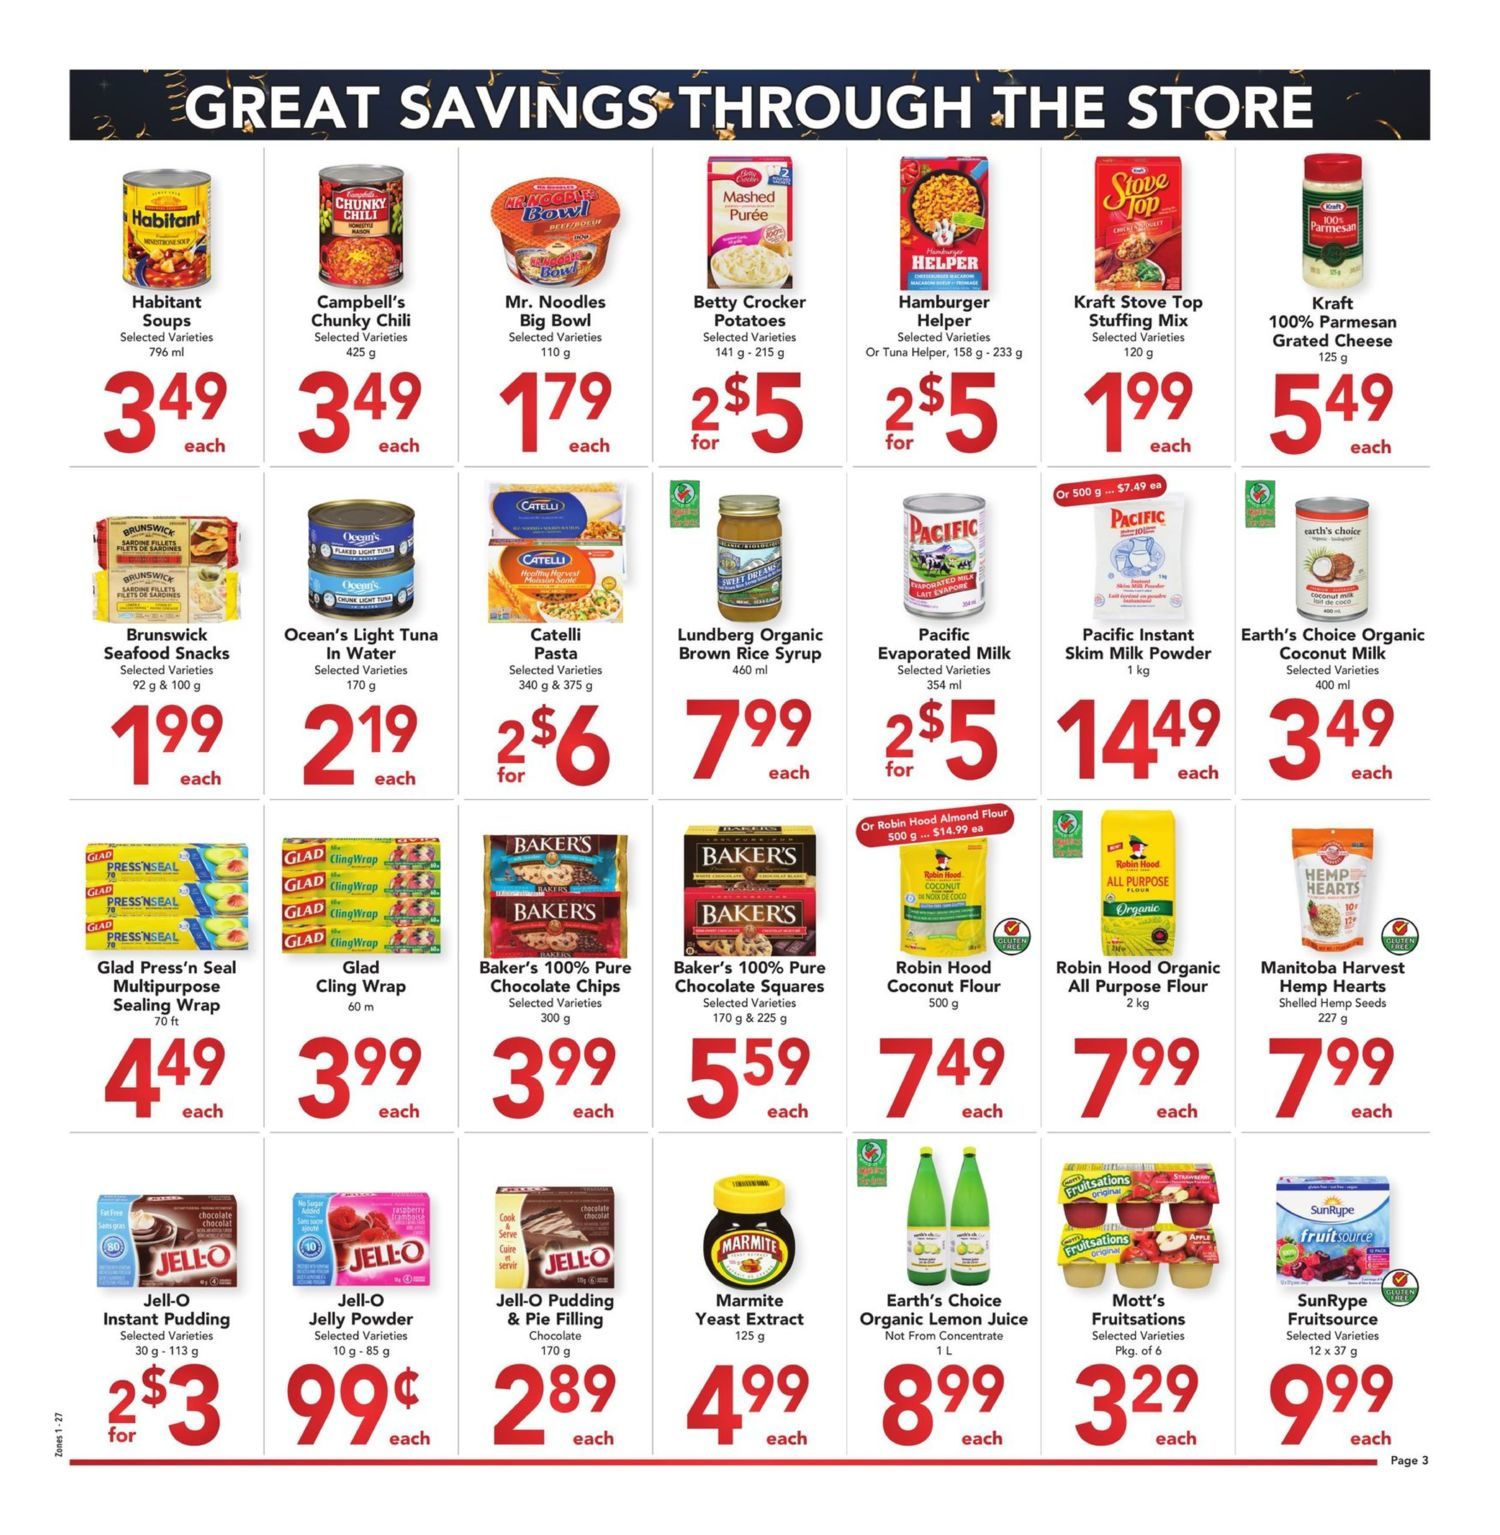 Buy-Low Foods - Budget Savers - Page 3